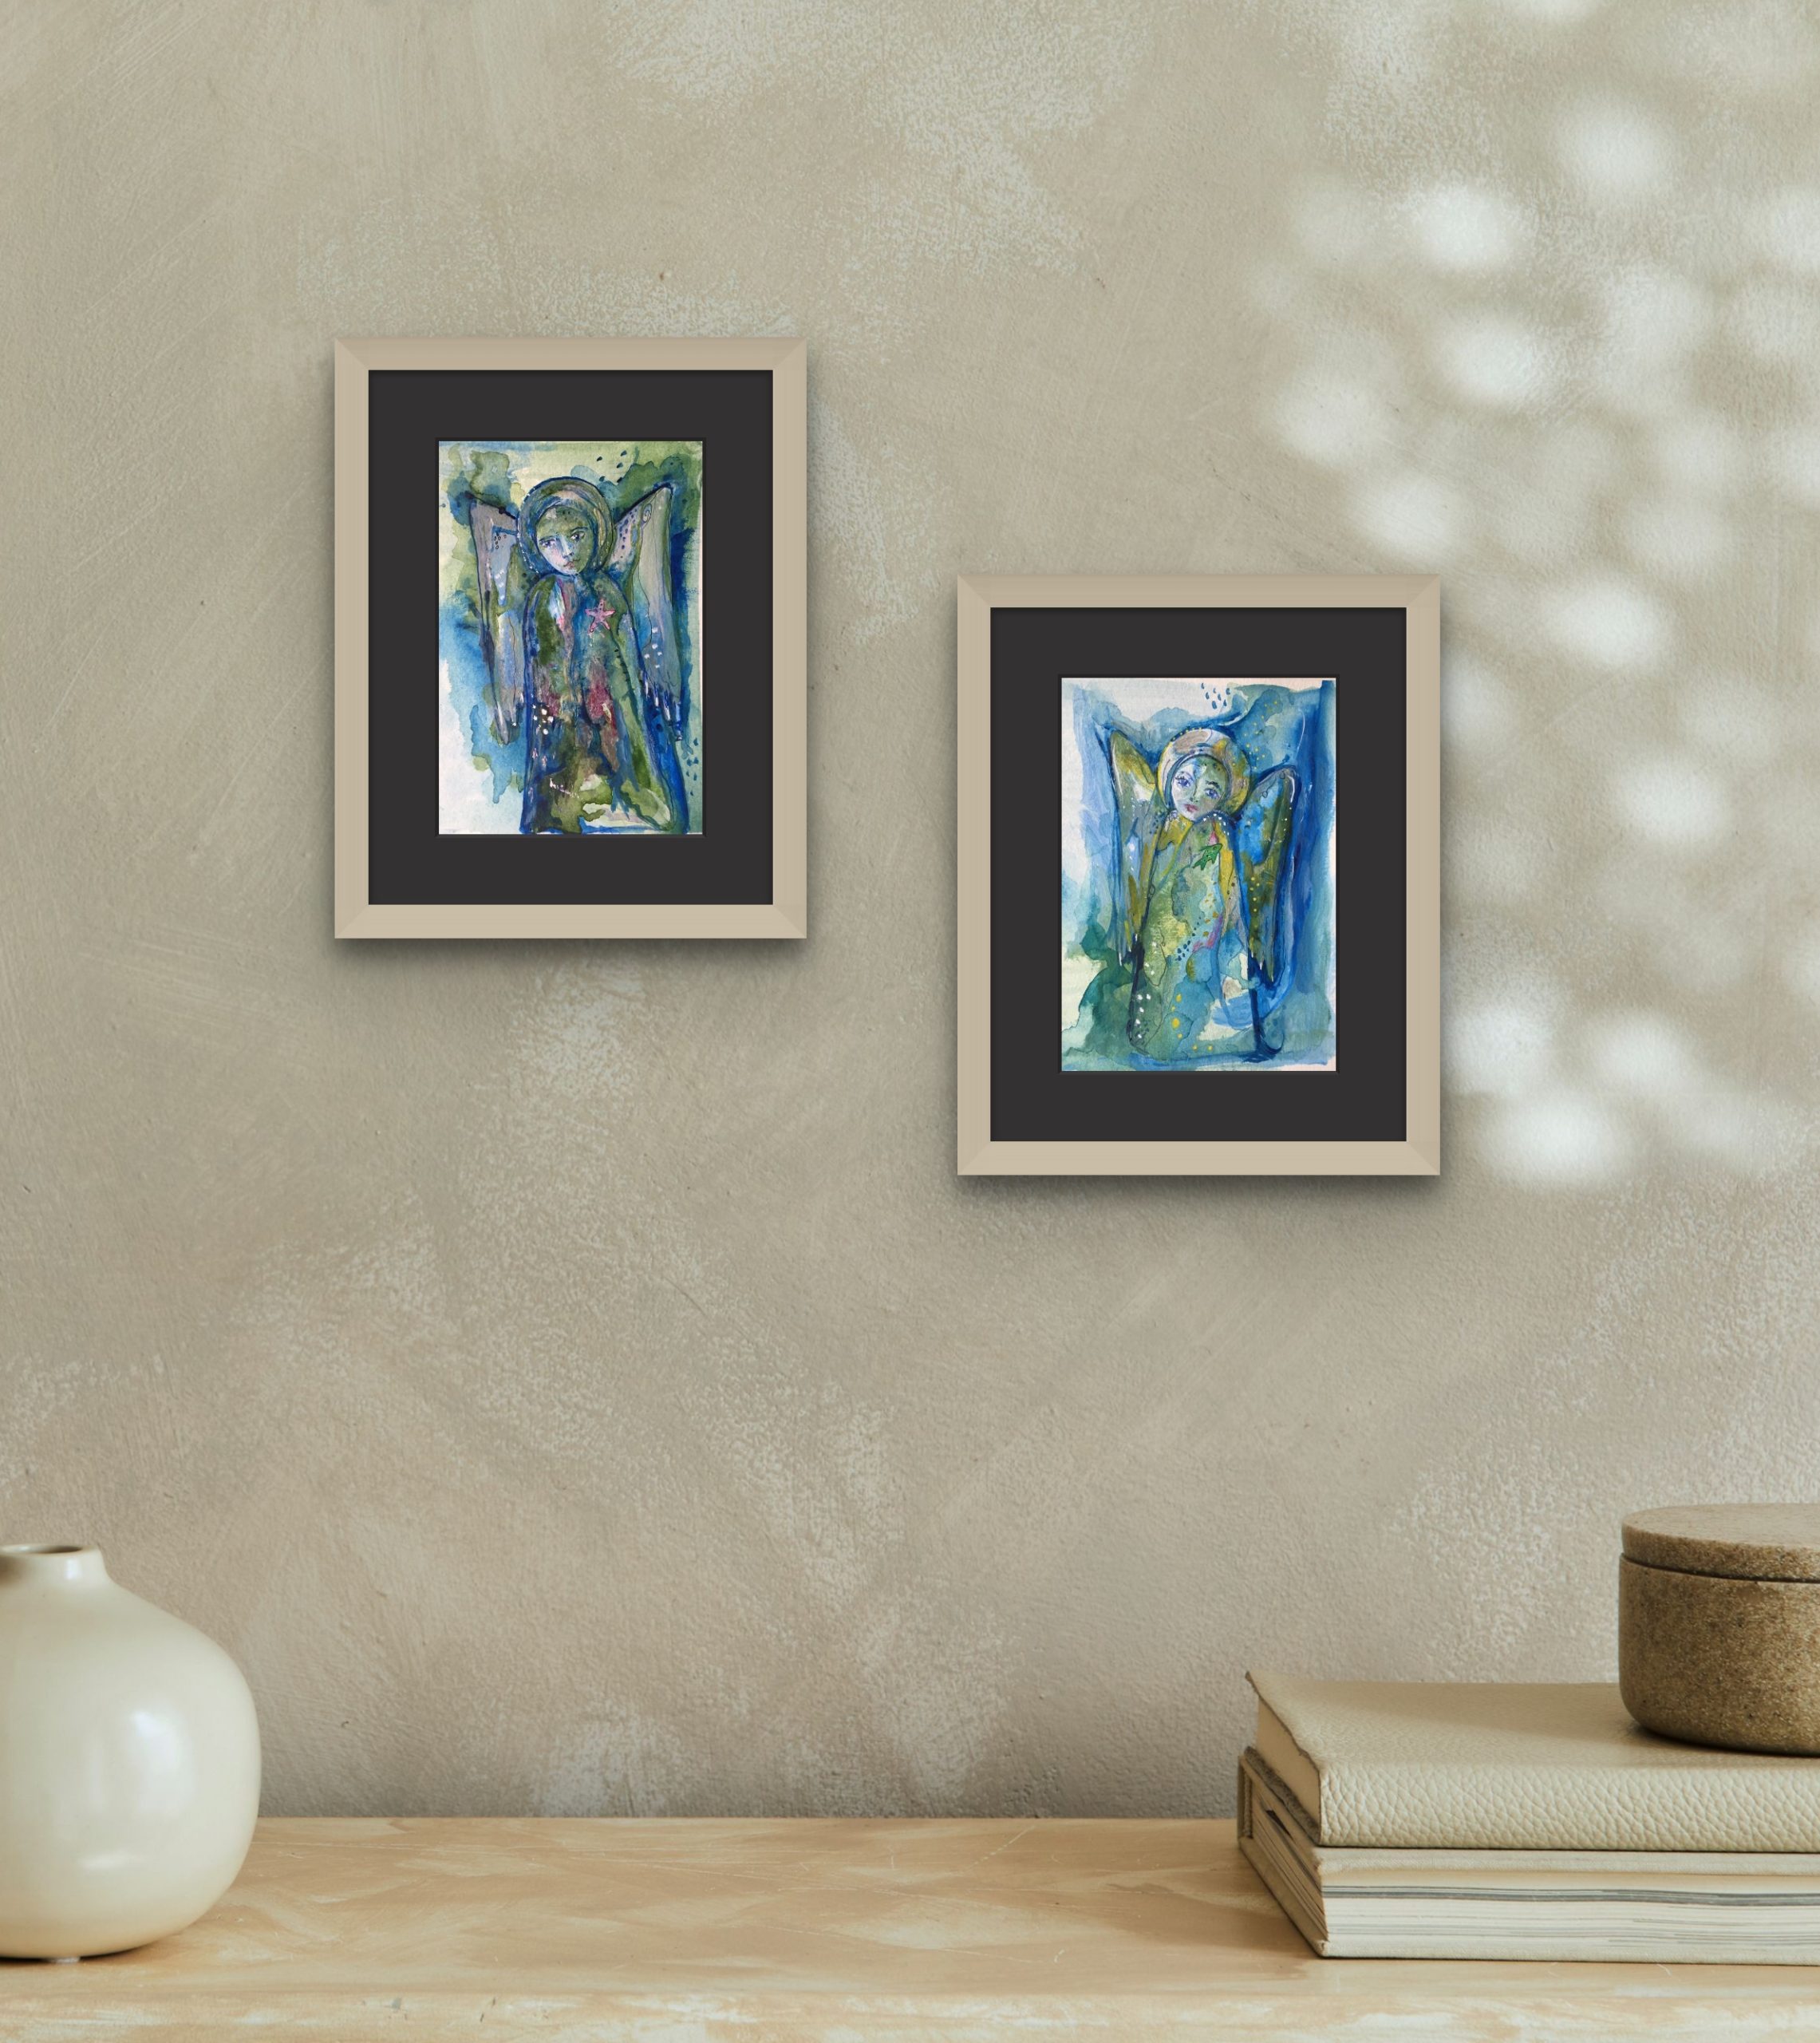 A pair of ocean angel paintings Both painted in layers of green and blues. One with a fish motif the other with a starfish motif.